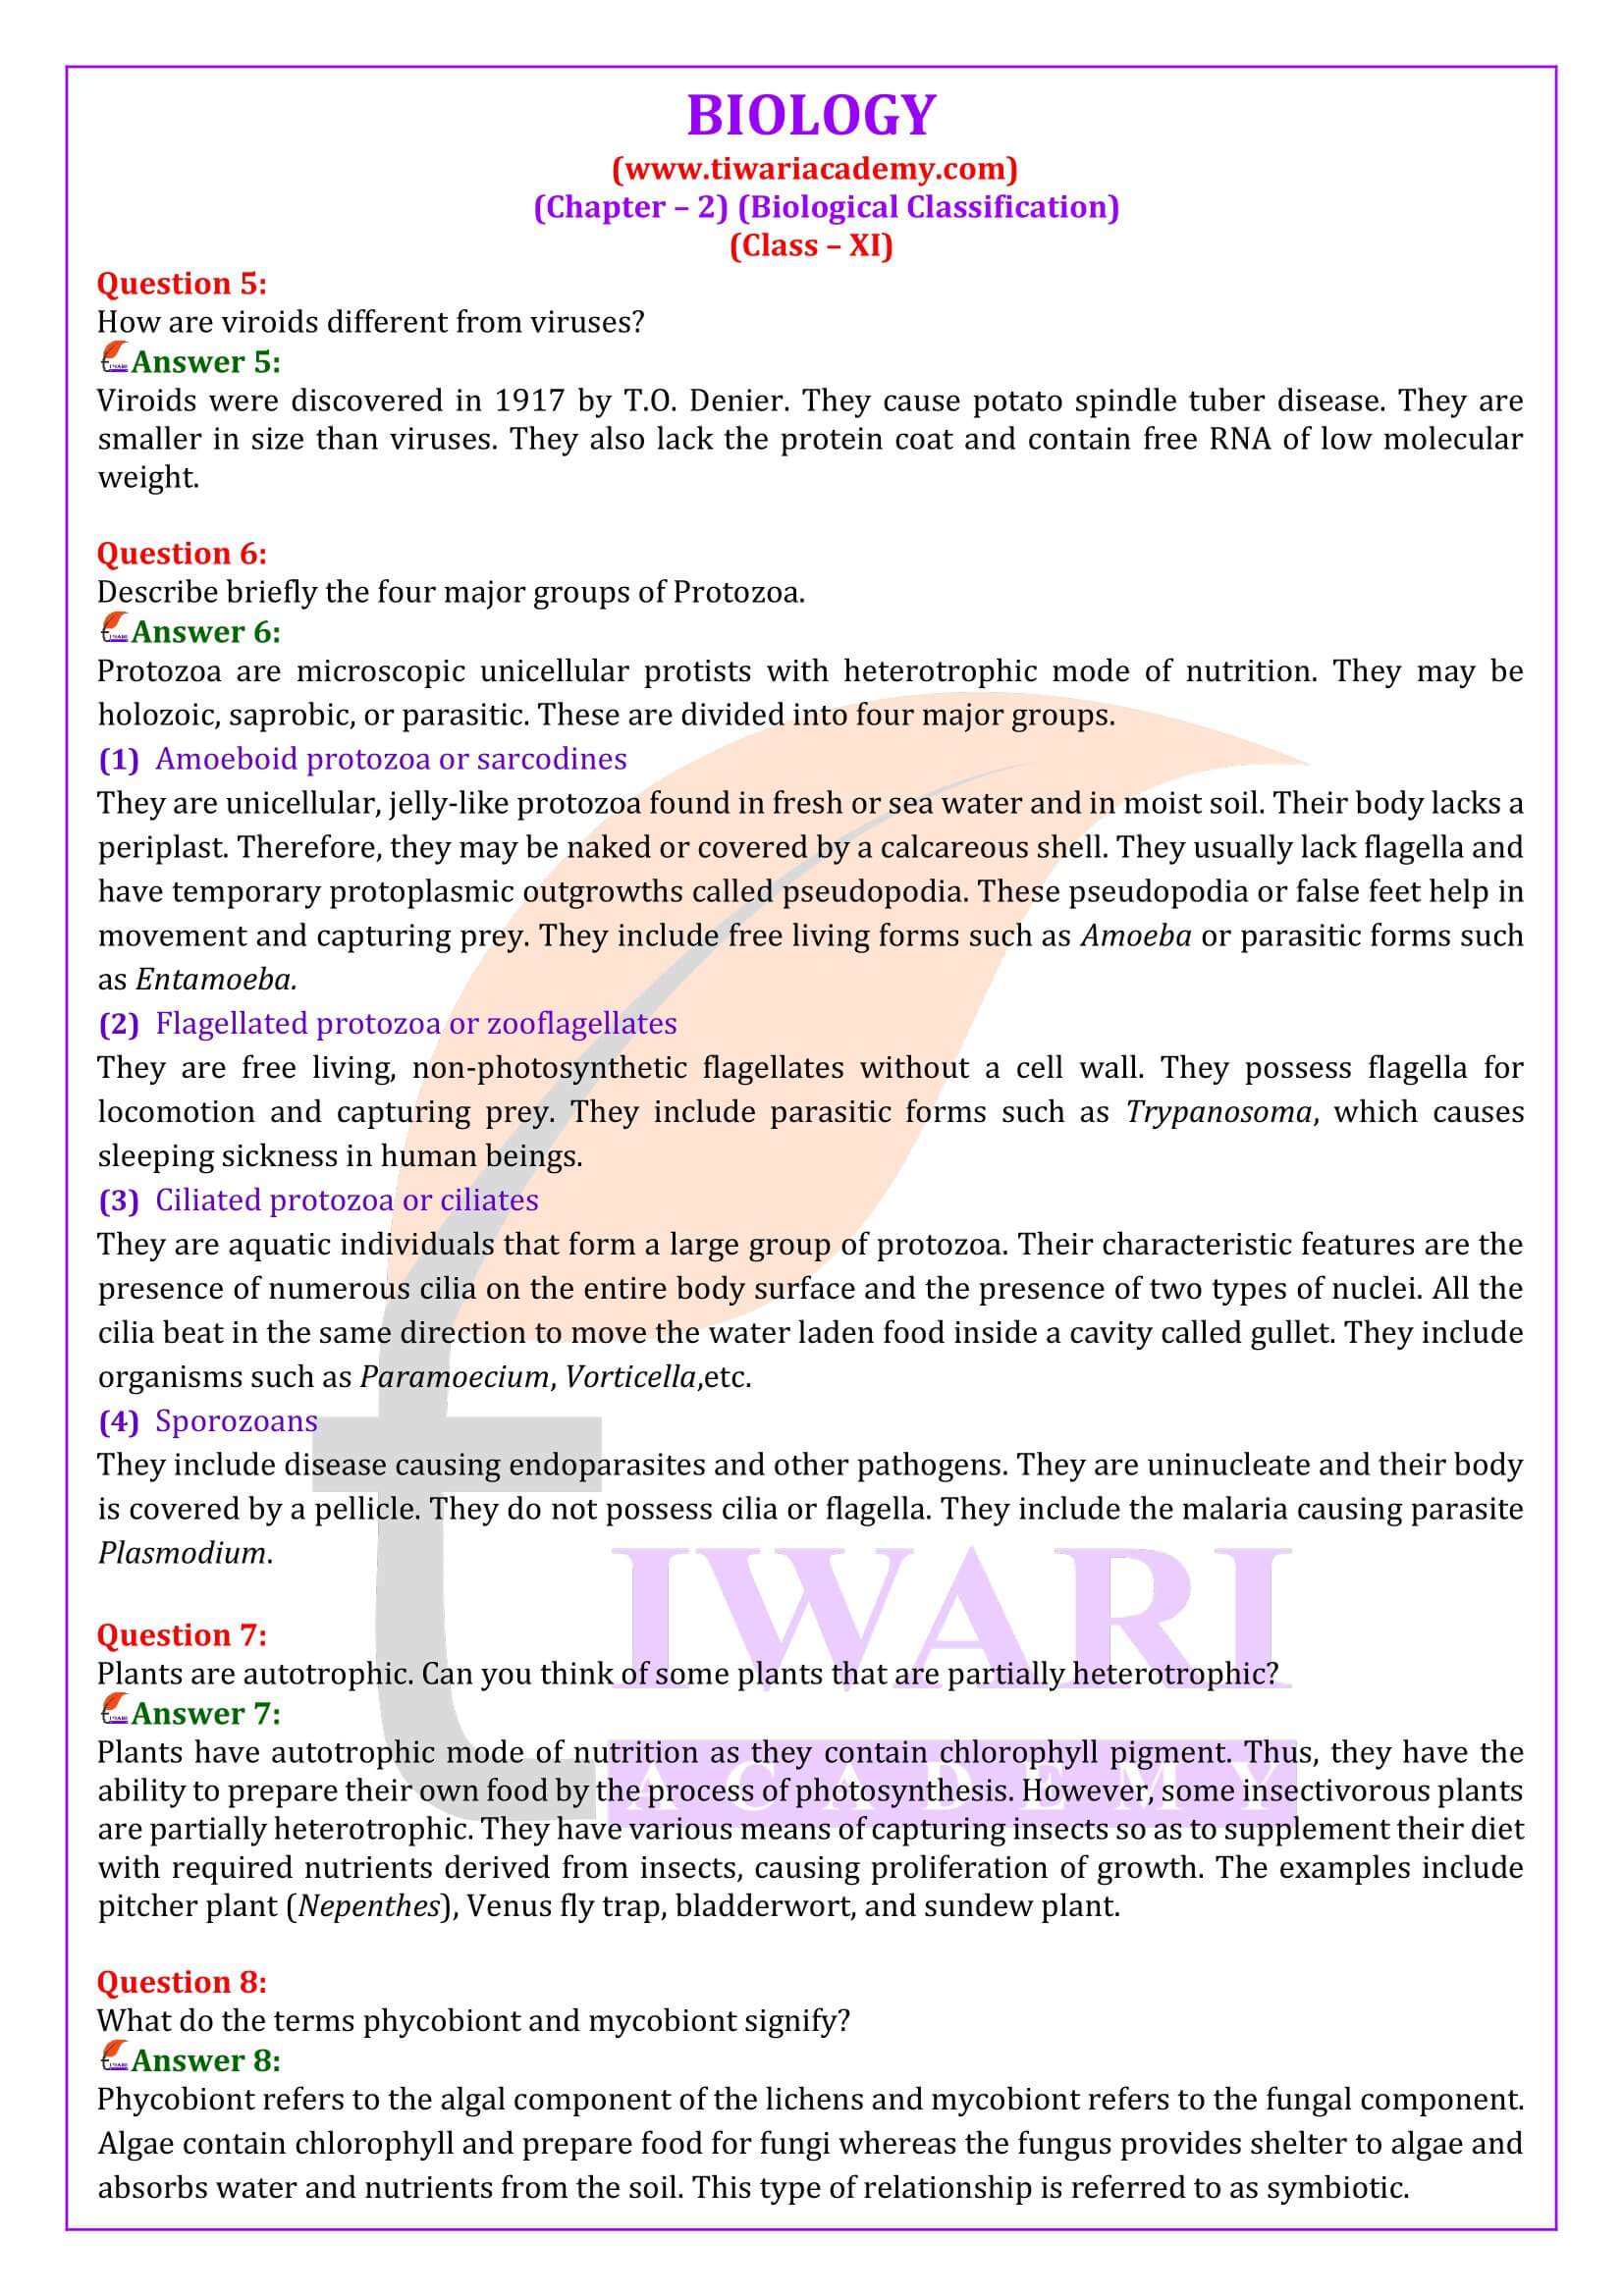 NCERT Solutions for Class 11 Biology Chapter 2